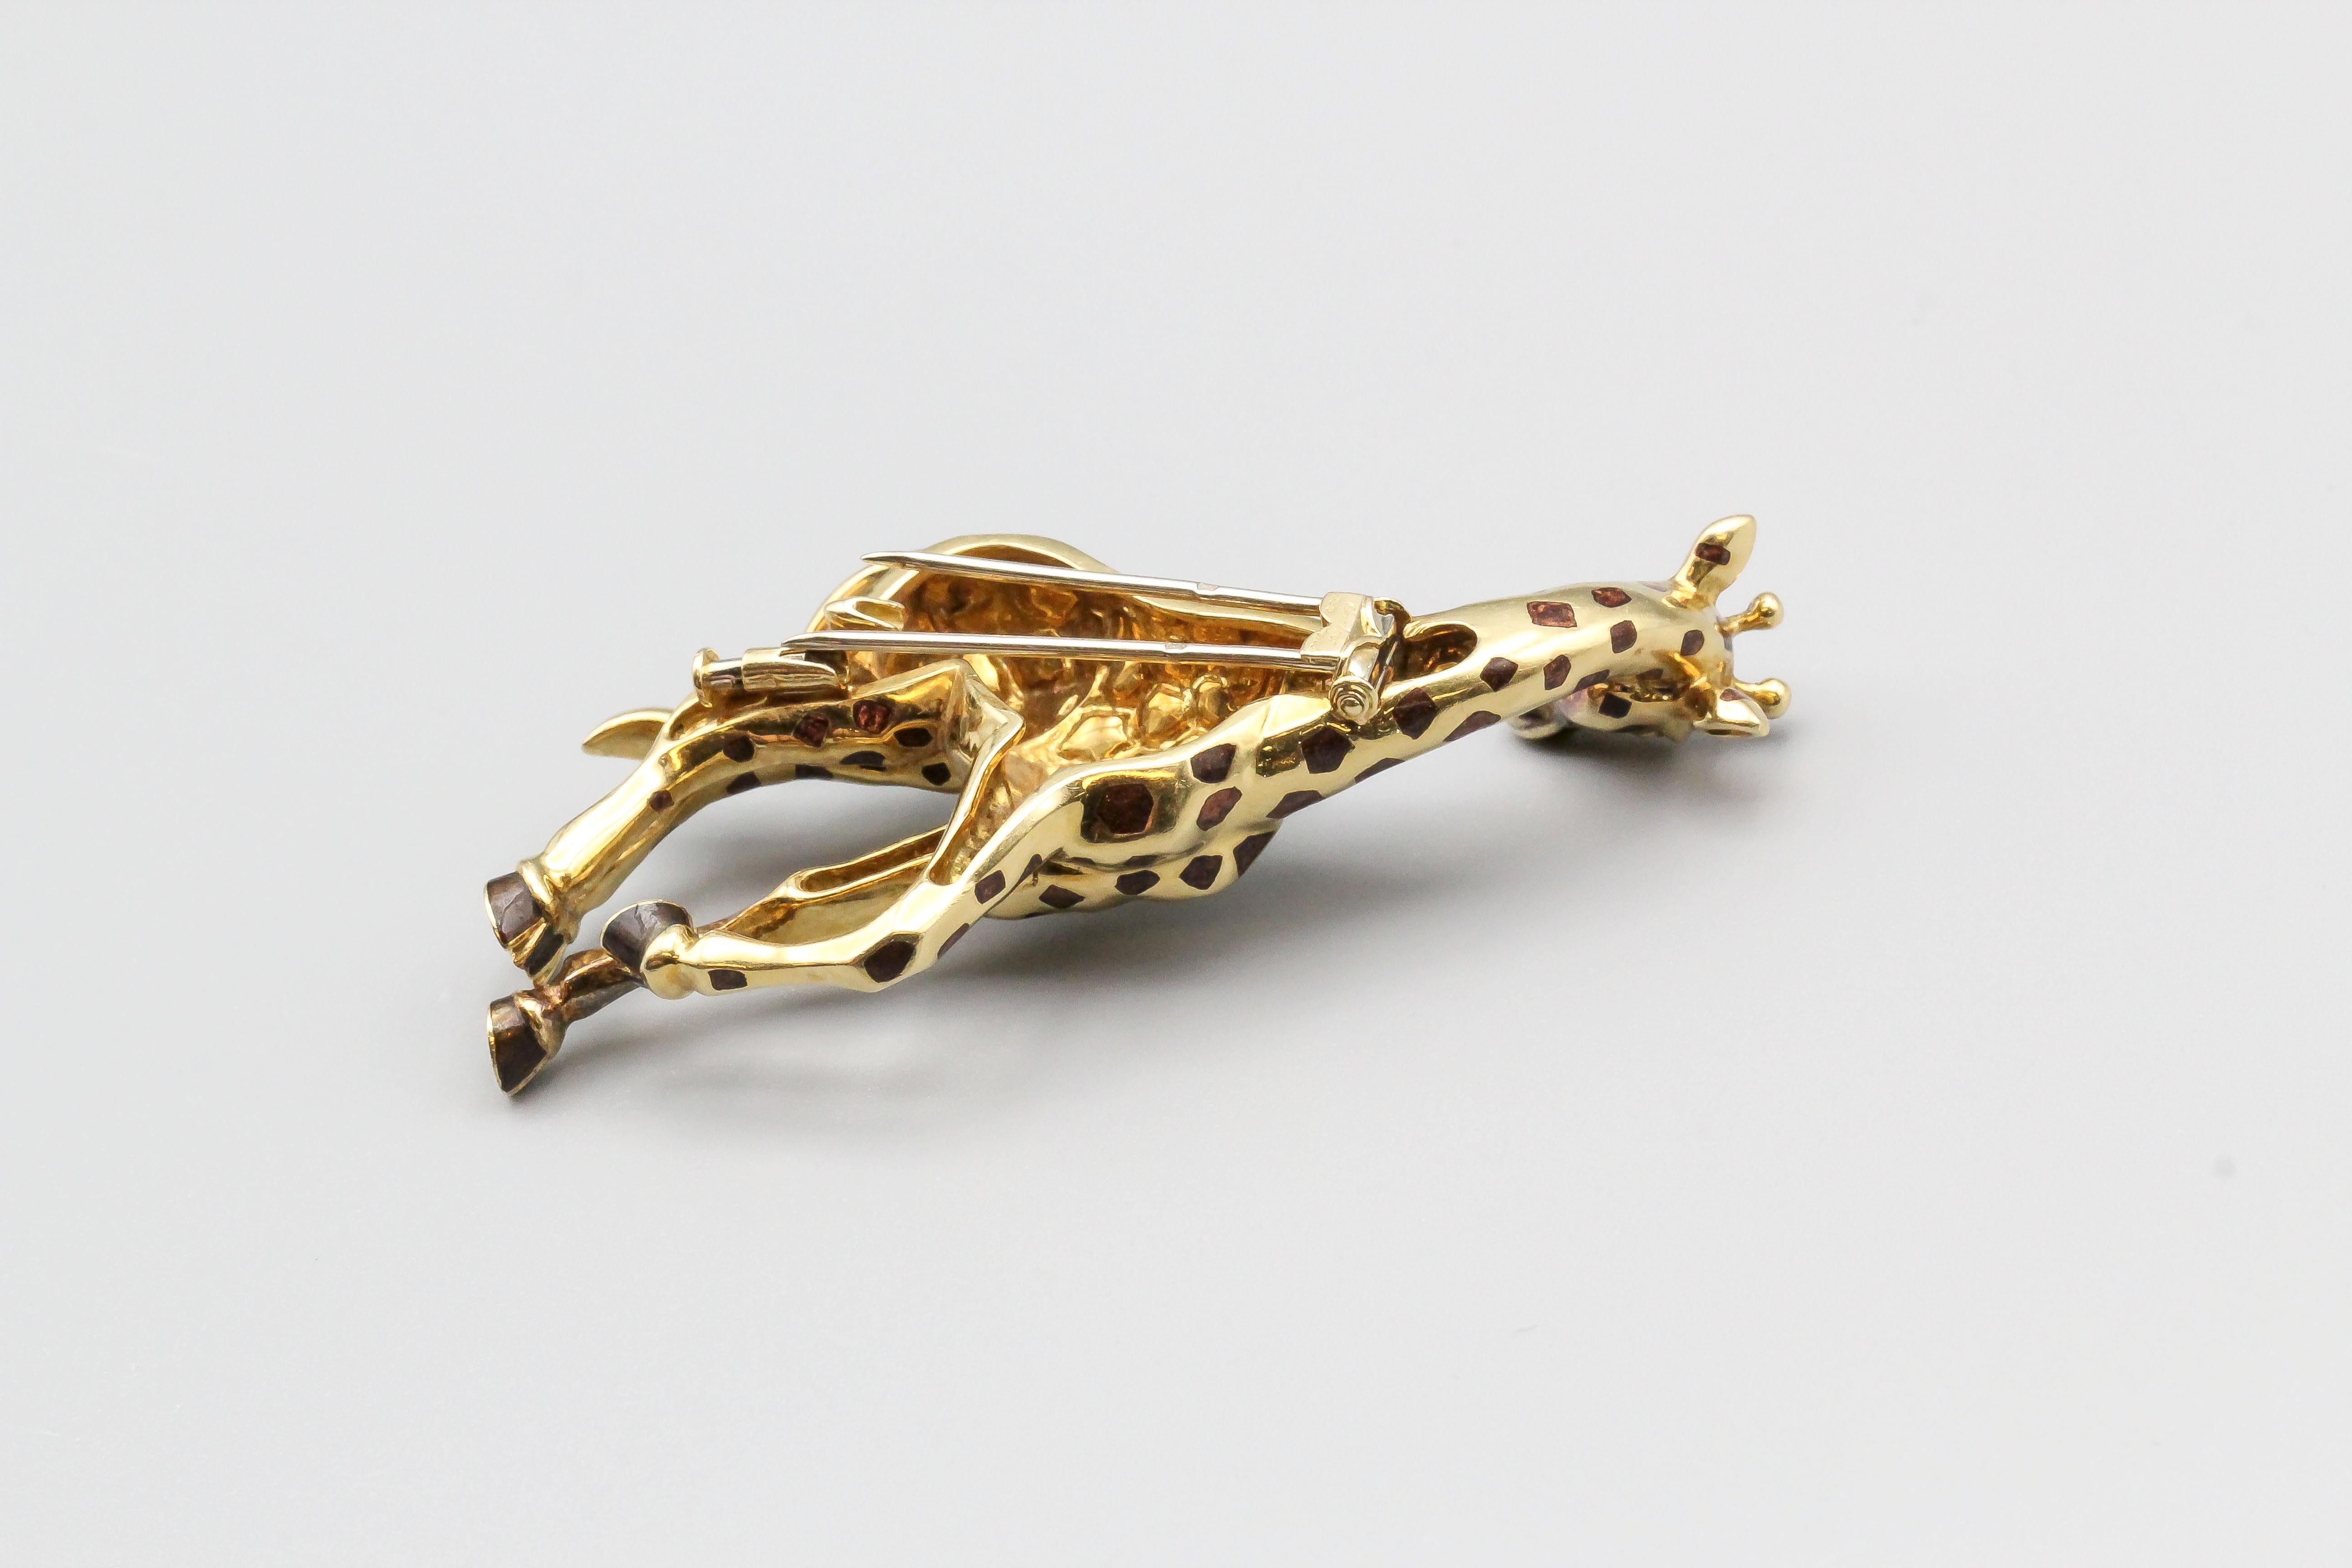 Fine emerald and enamel on 18K yellow gold brooch by Cartier. It resembles a giraffe, with brown enamel spotsand  emerald eyes and 18K gold setting. 

Hallmarks: Cartier, French 18K gold assay marks, 750, reference numbers.